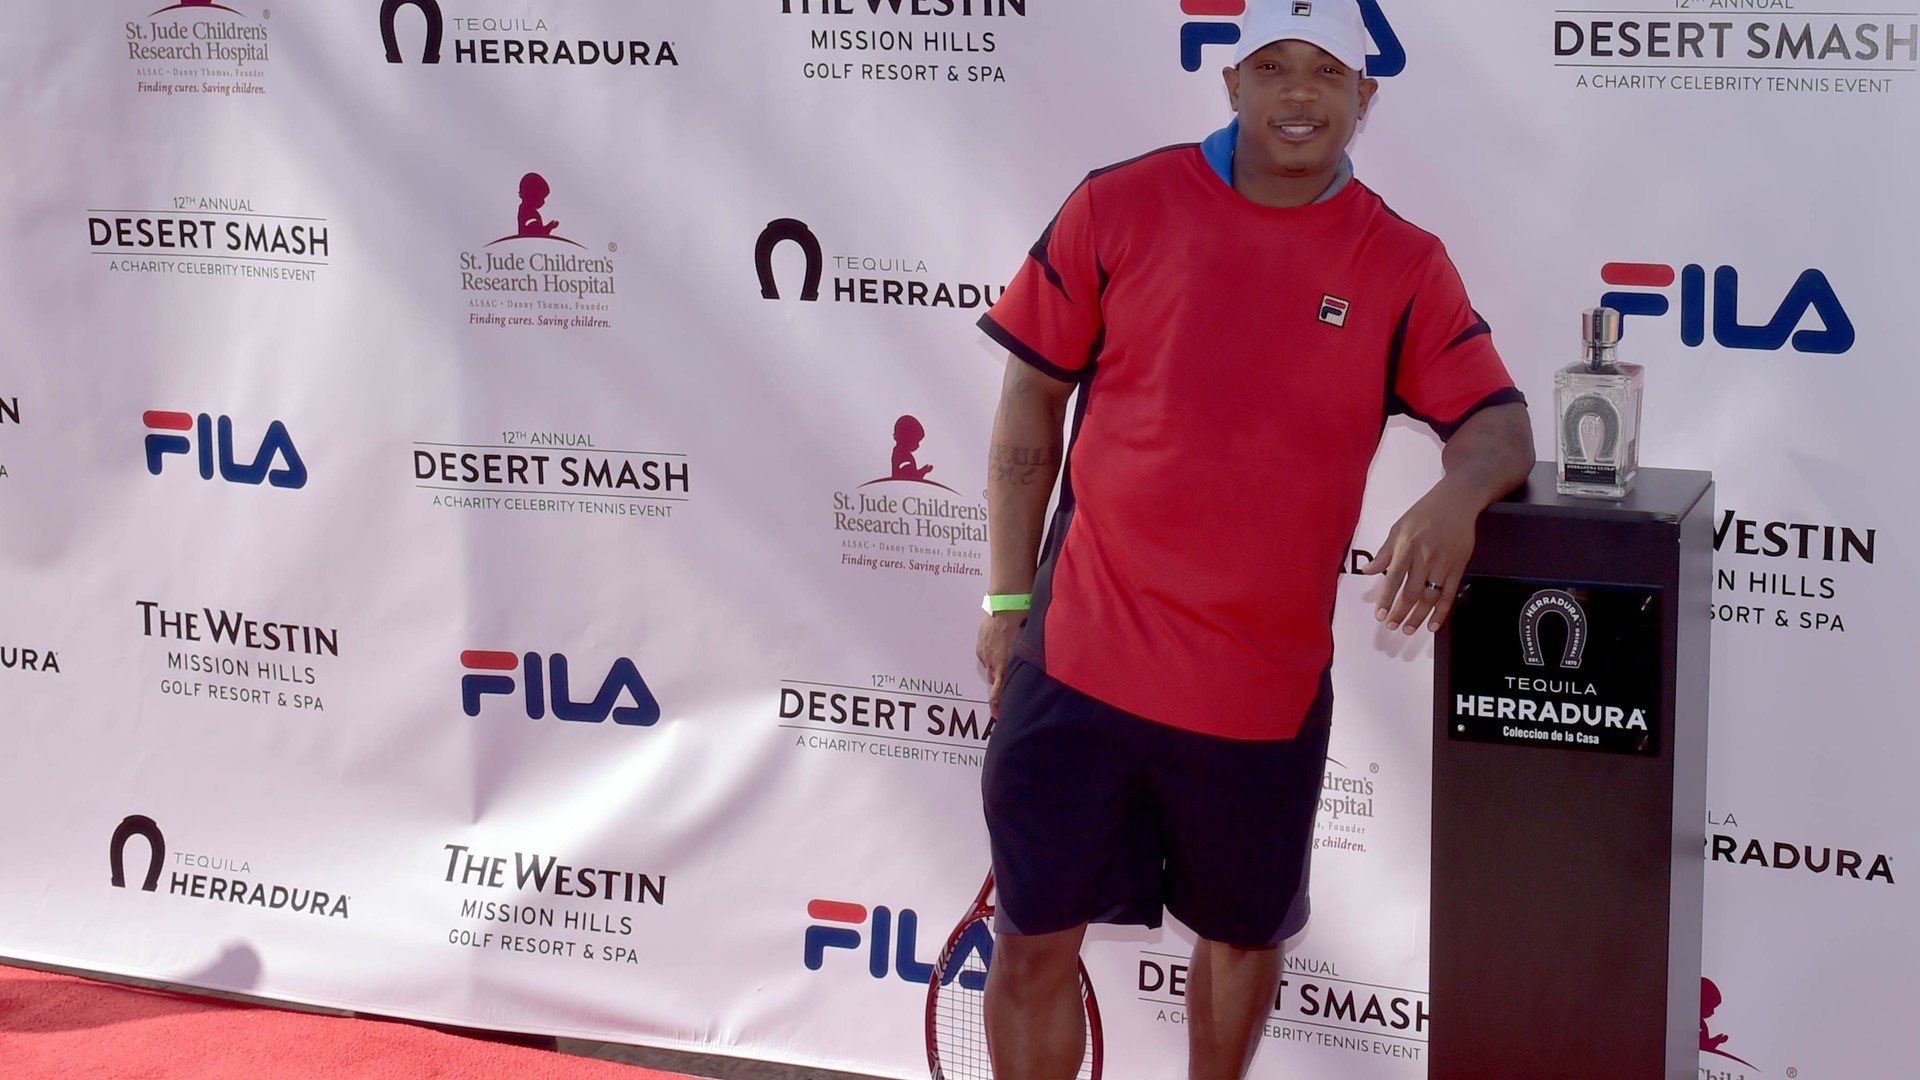 Ja Rule Wears FILA at the 12th Annual Desert Smash Charity Celebrity Tennis Event